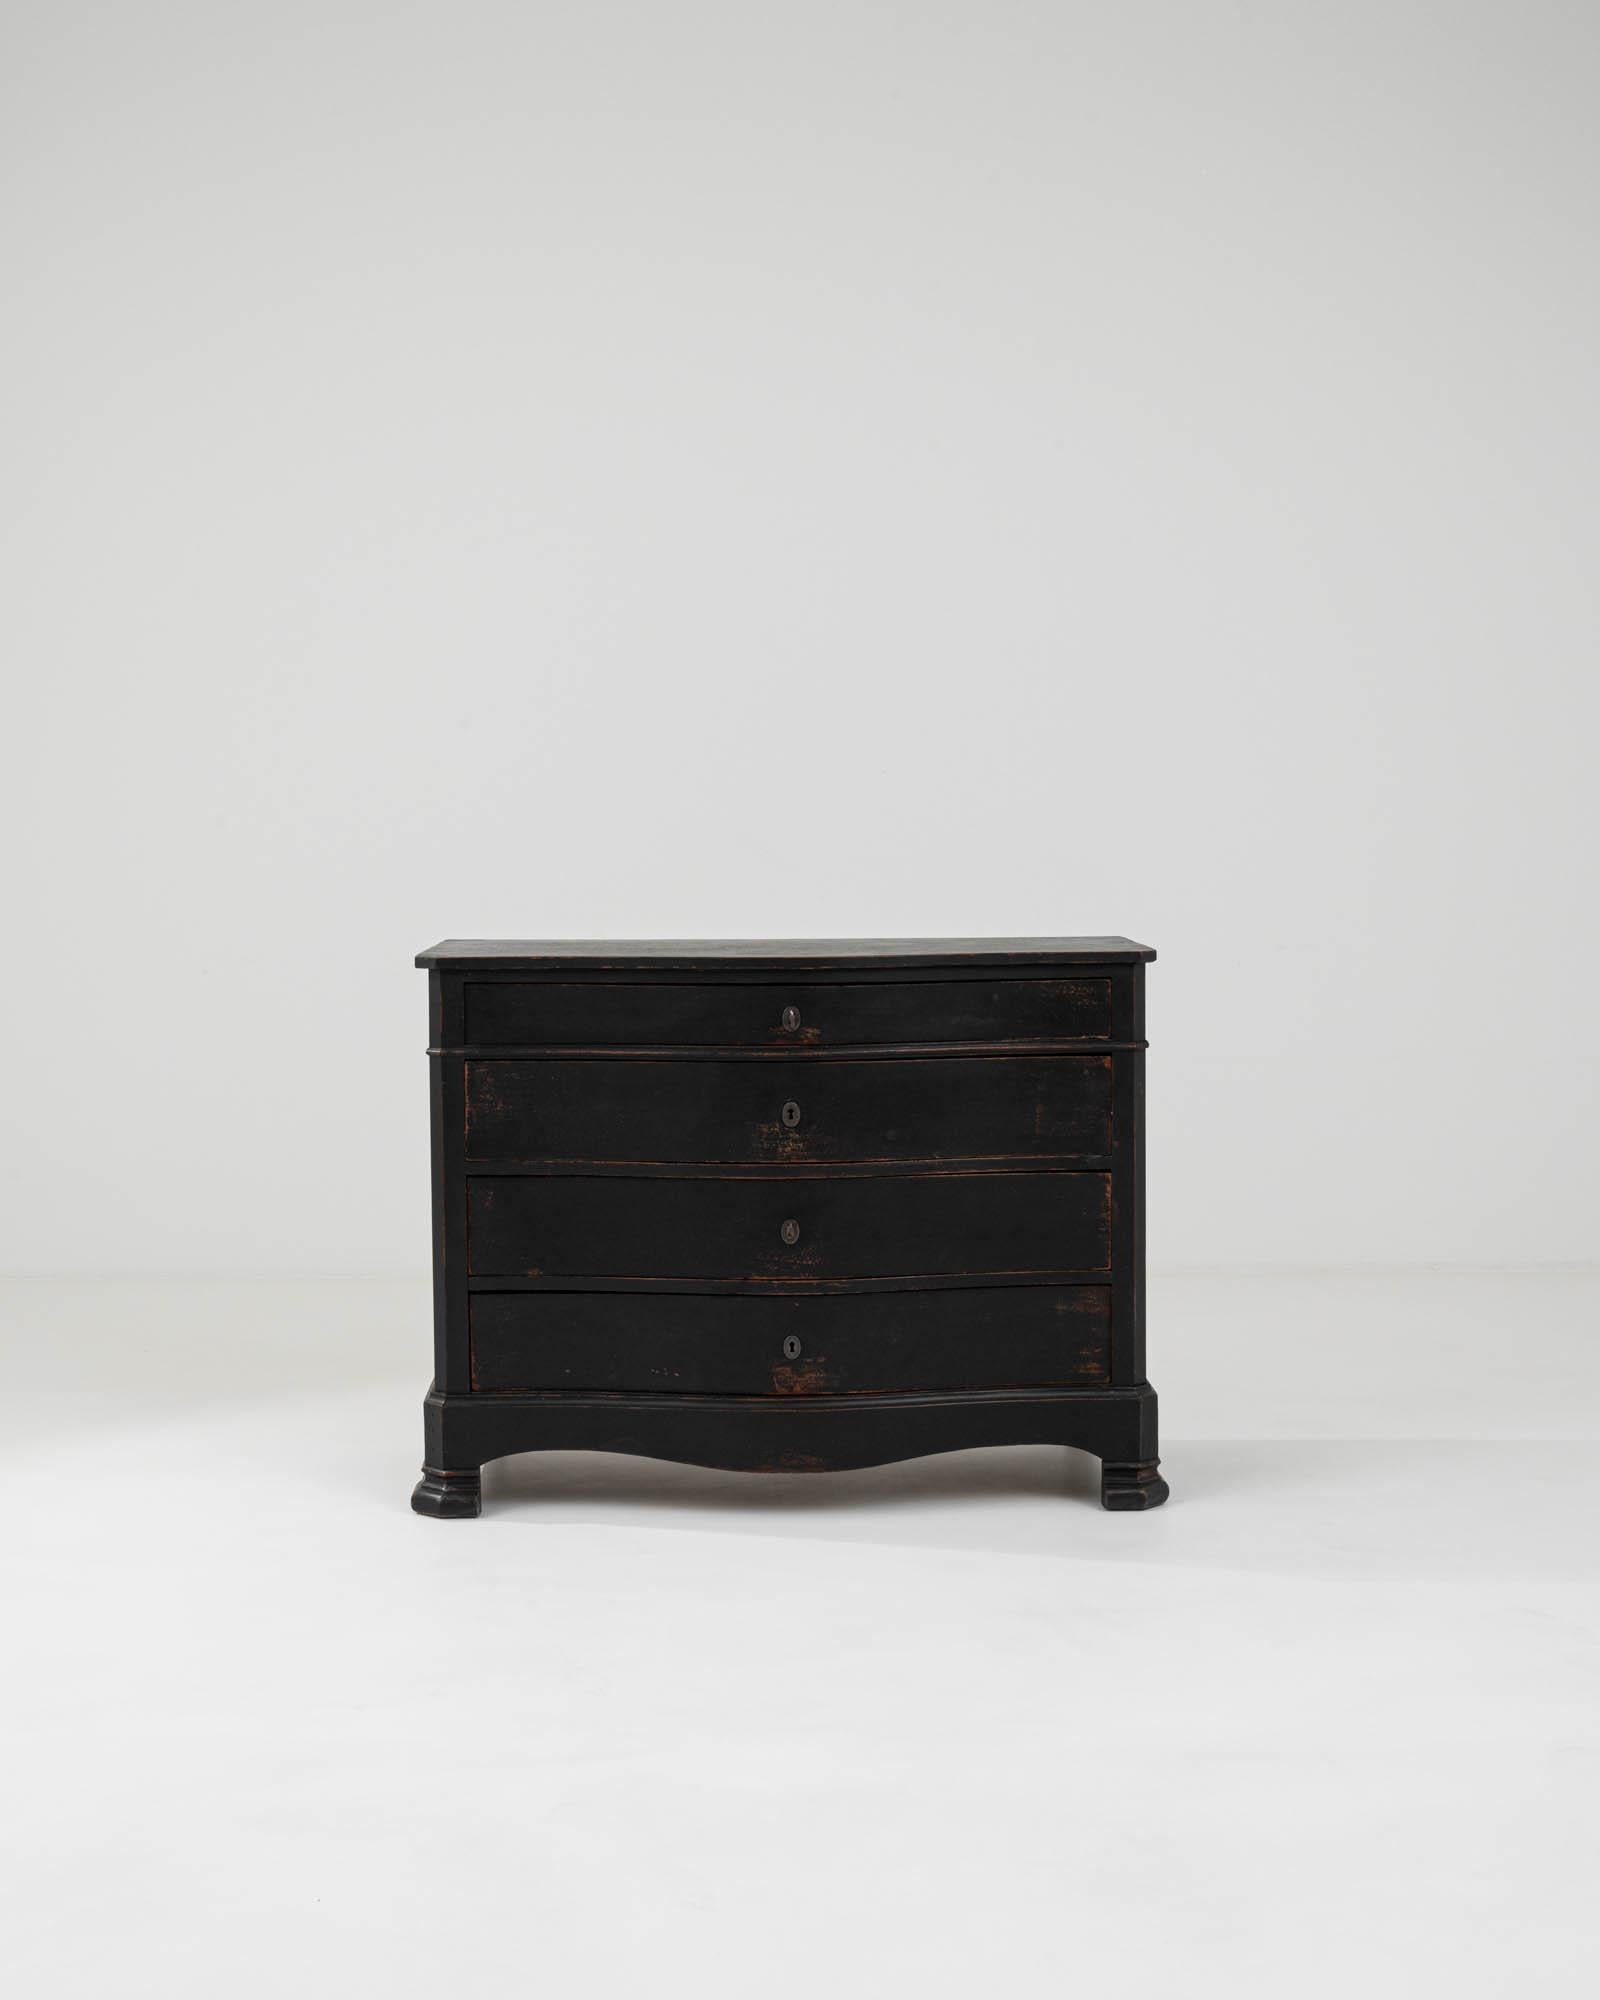 Discover a storied masterpiece for your home with this 1910s French Wooden Chest of Drawers. Echoing the robust yet refined style of the early twentieth century, this piece is graced with a rich, ebony patina that highlights its age and the